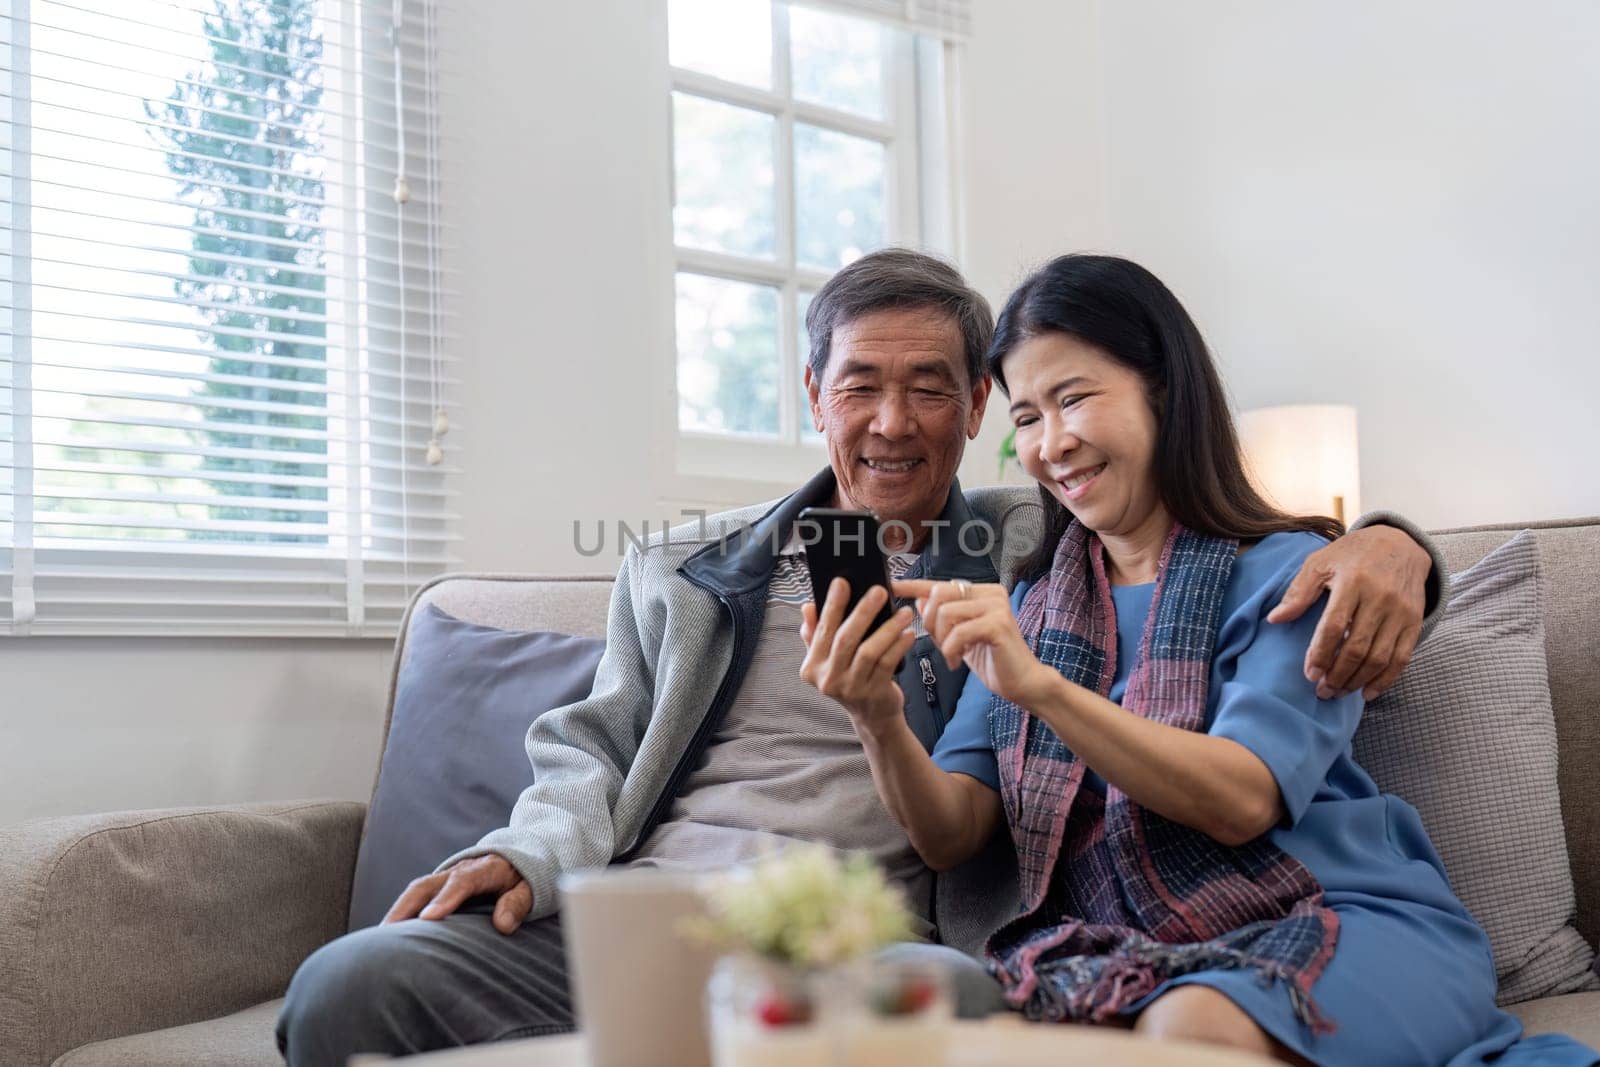 Senior couple browsing smartphone at home. Concept of technology, companionship, and relaxation.